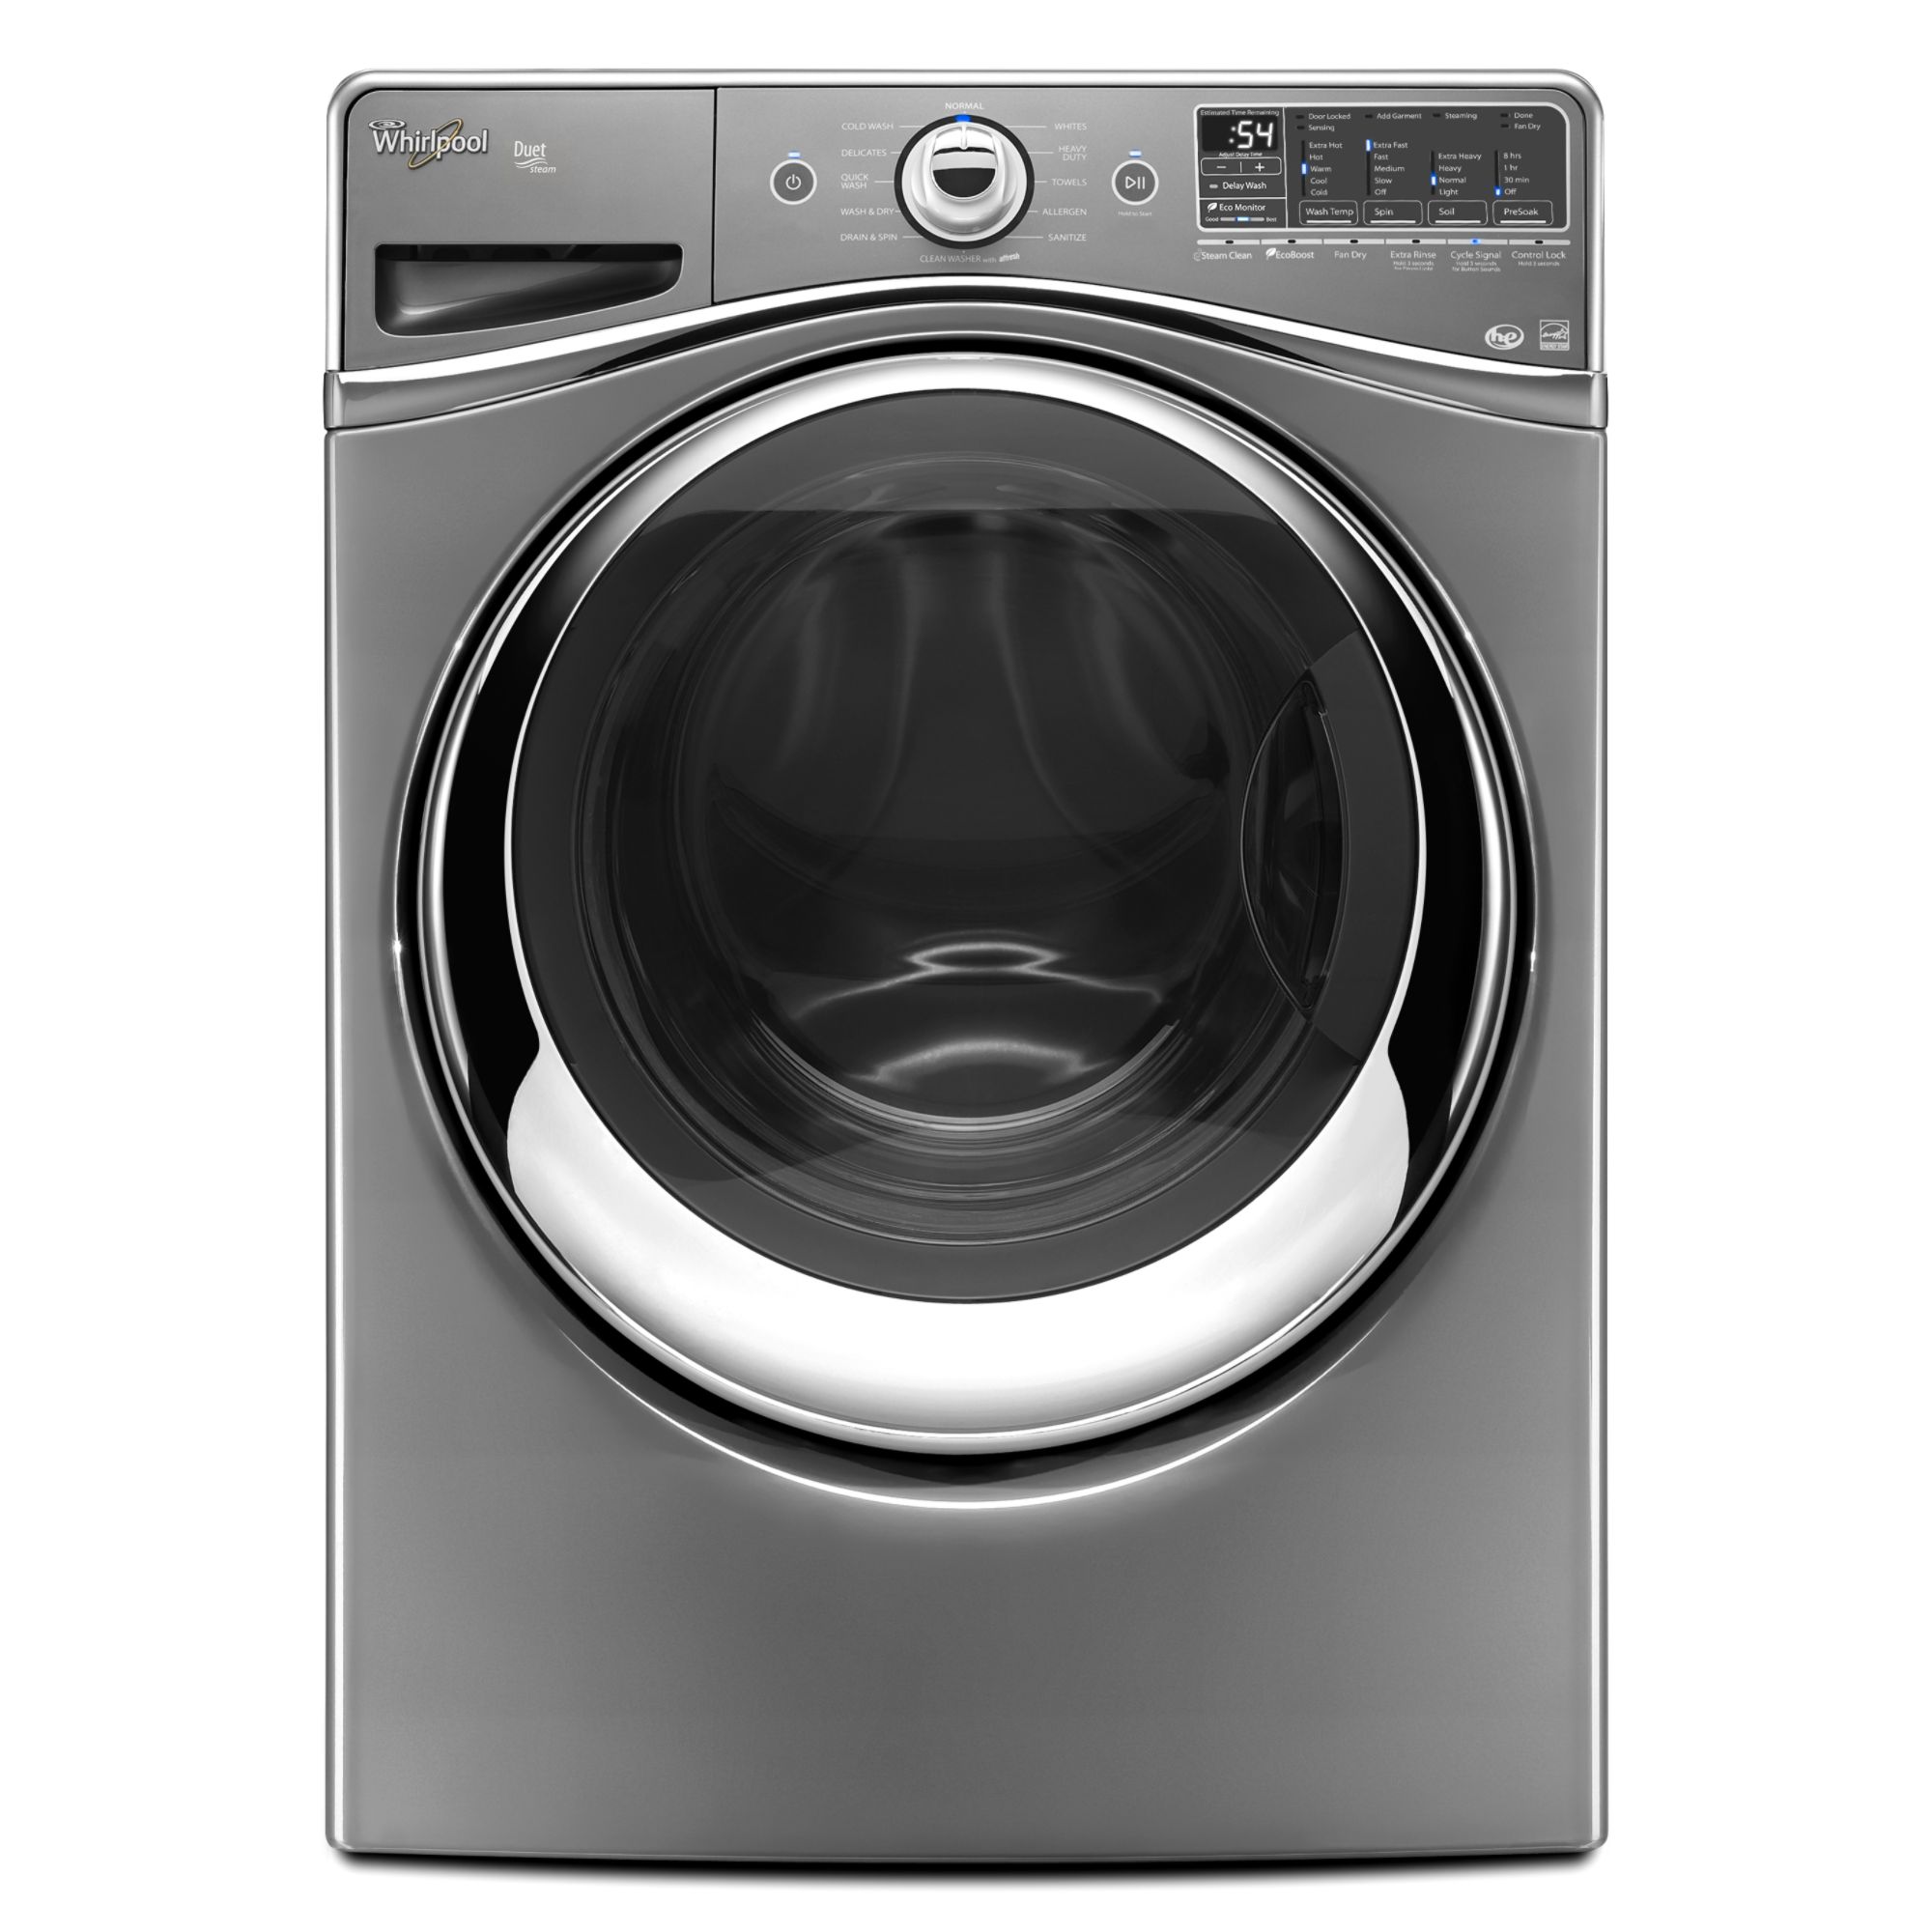 Whirlpool 4.3 cu. ft. Front-Load Washer w/ Precision Dispense - Chrome Shadow